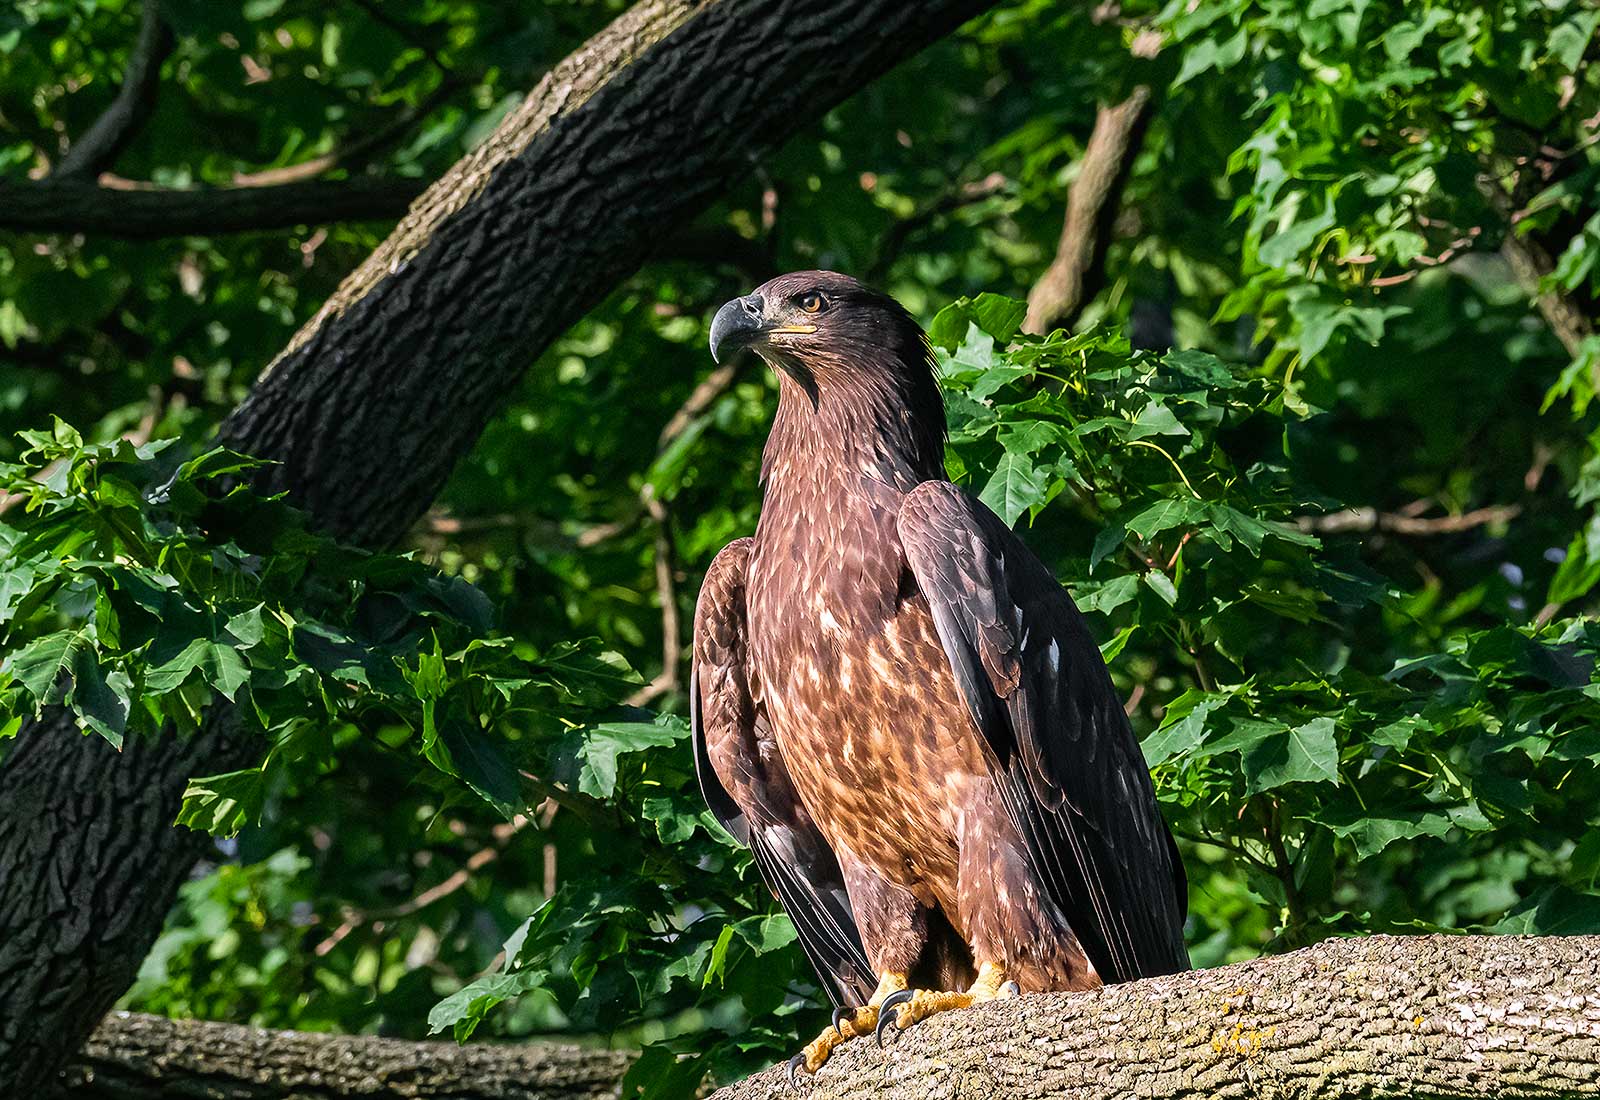 Juvenile Eagle posing on a tree branch